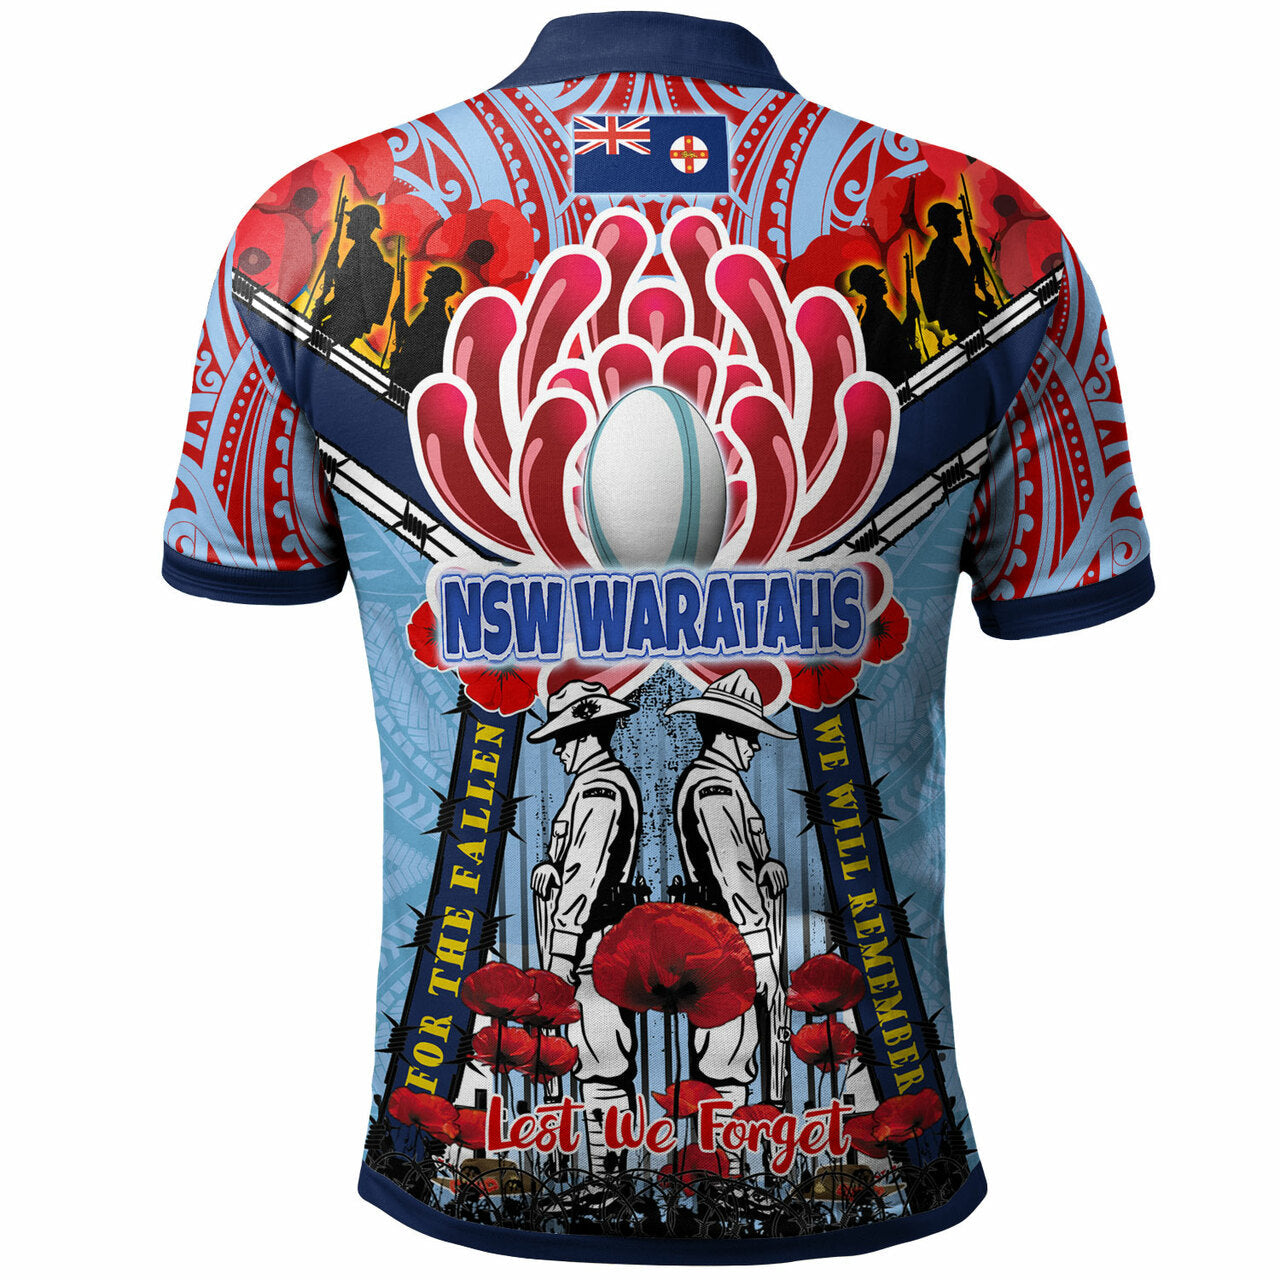 waratahs-rugby-custom-anzac-day-polo-shirt-remembrance-nsw-waratahs-with-indigenous-patterns-and-poppy-flower